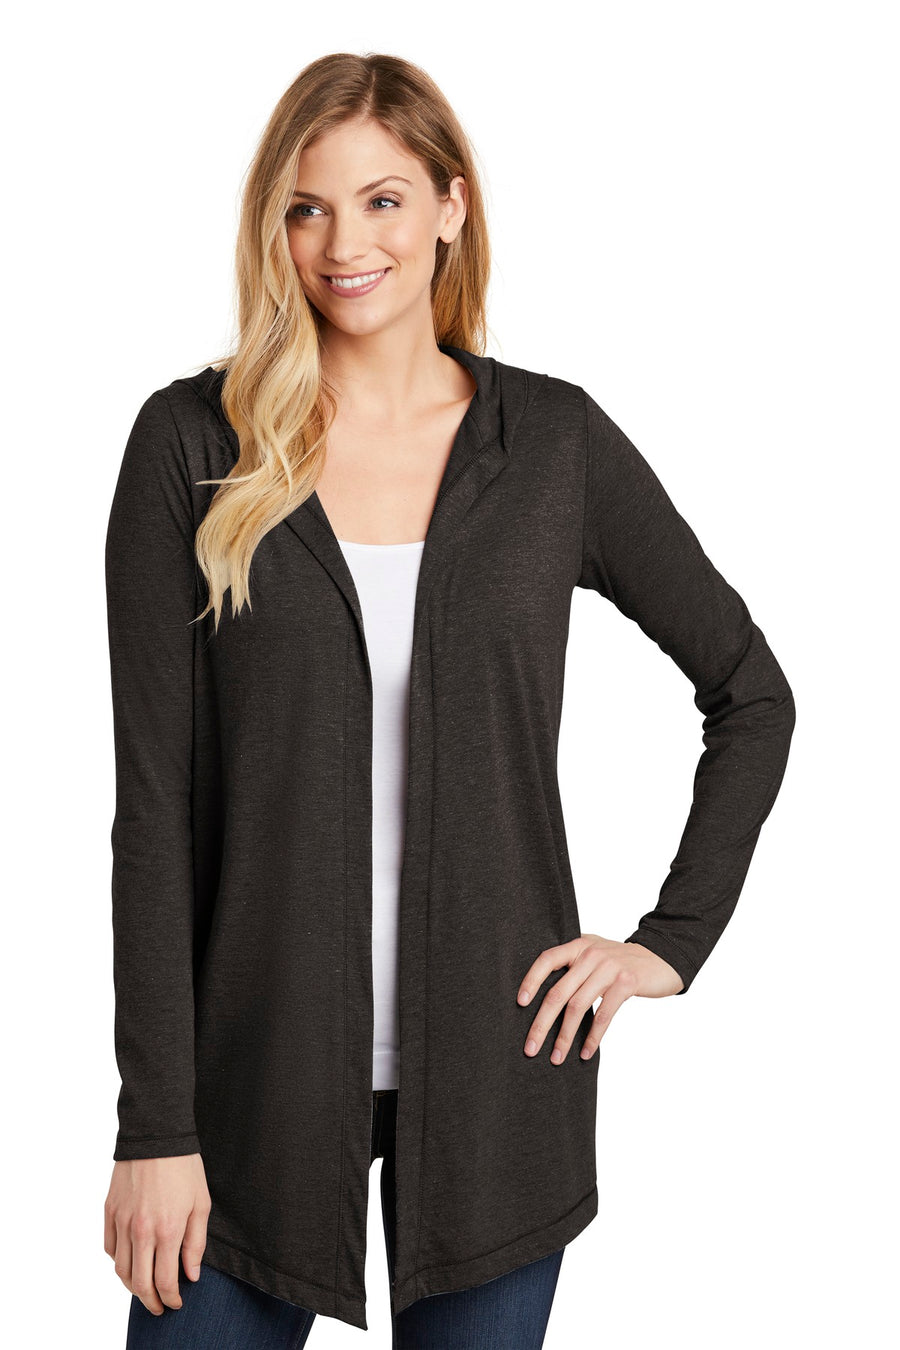 District Perfect Tri Hooded Cardigan.